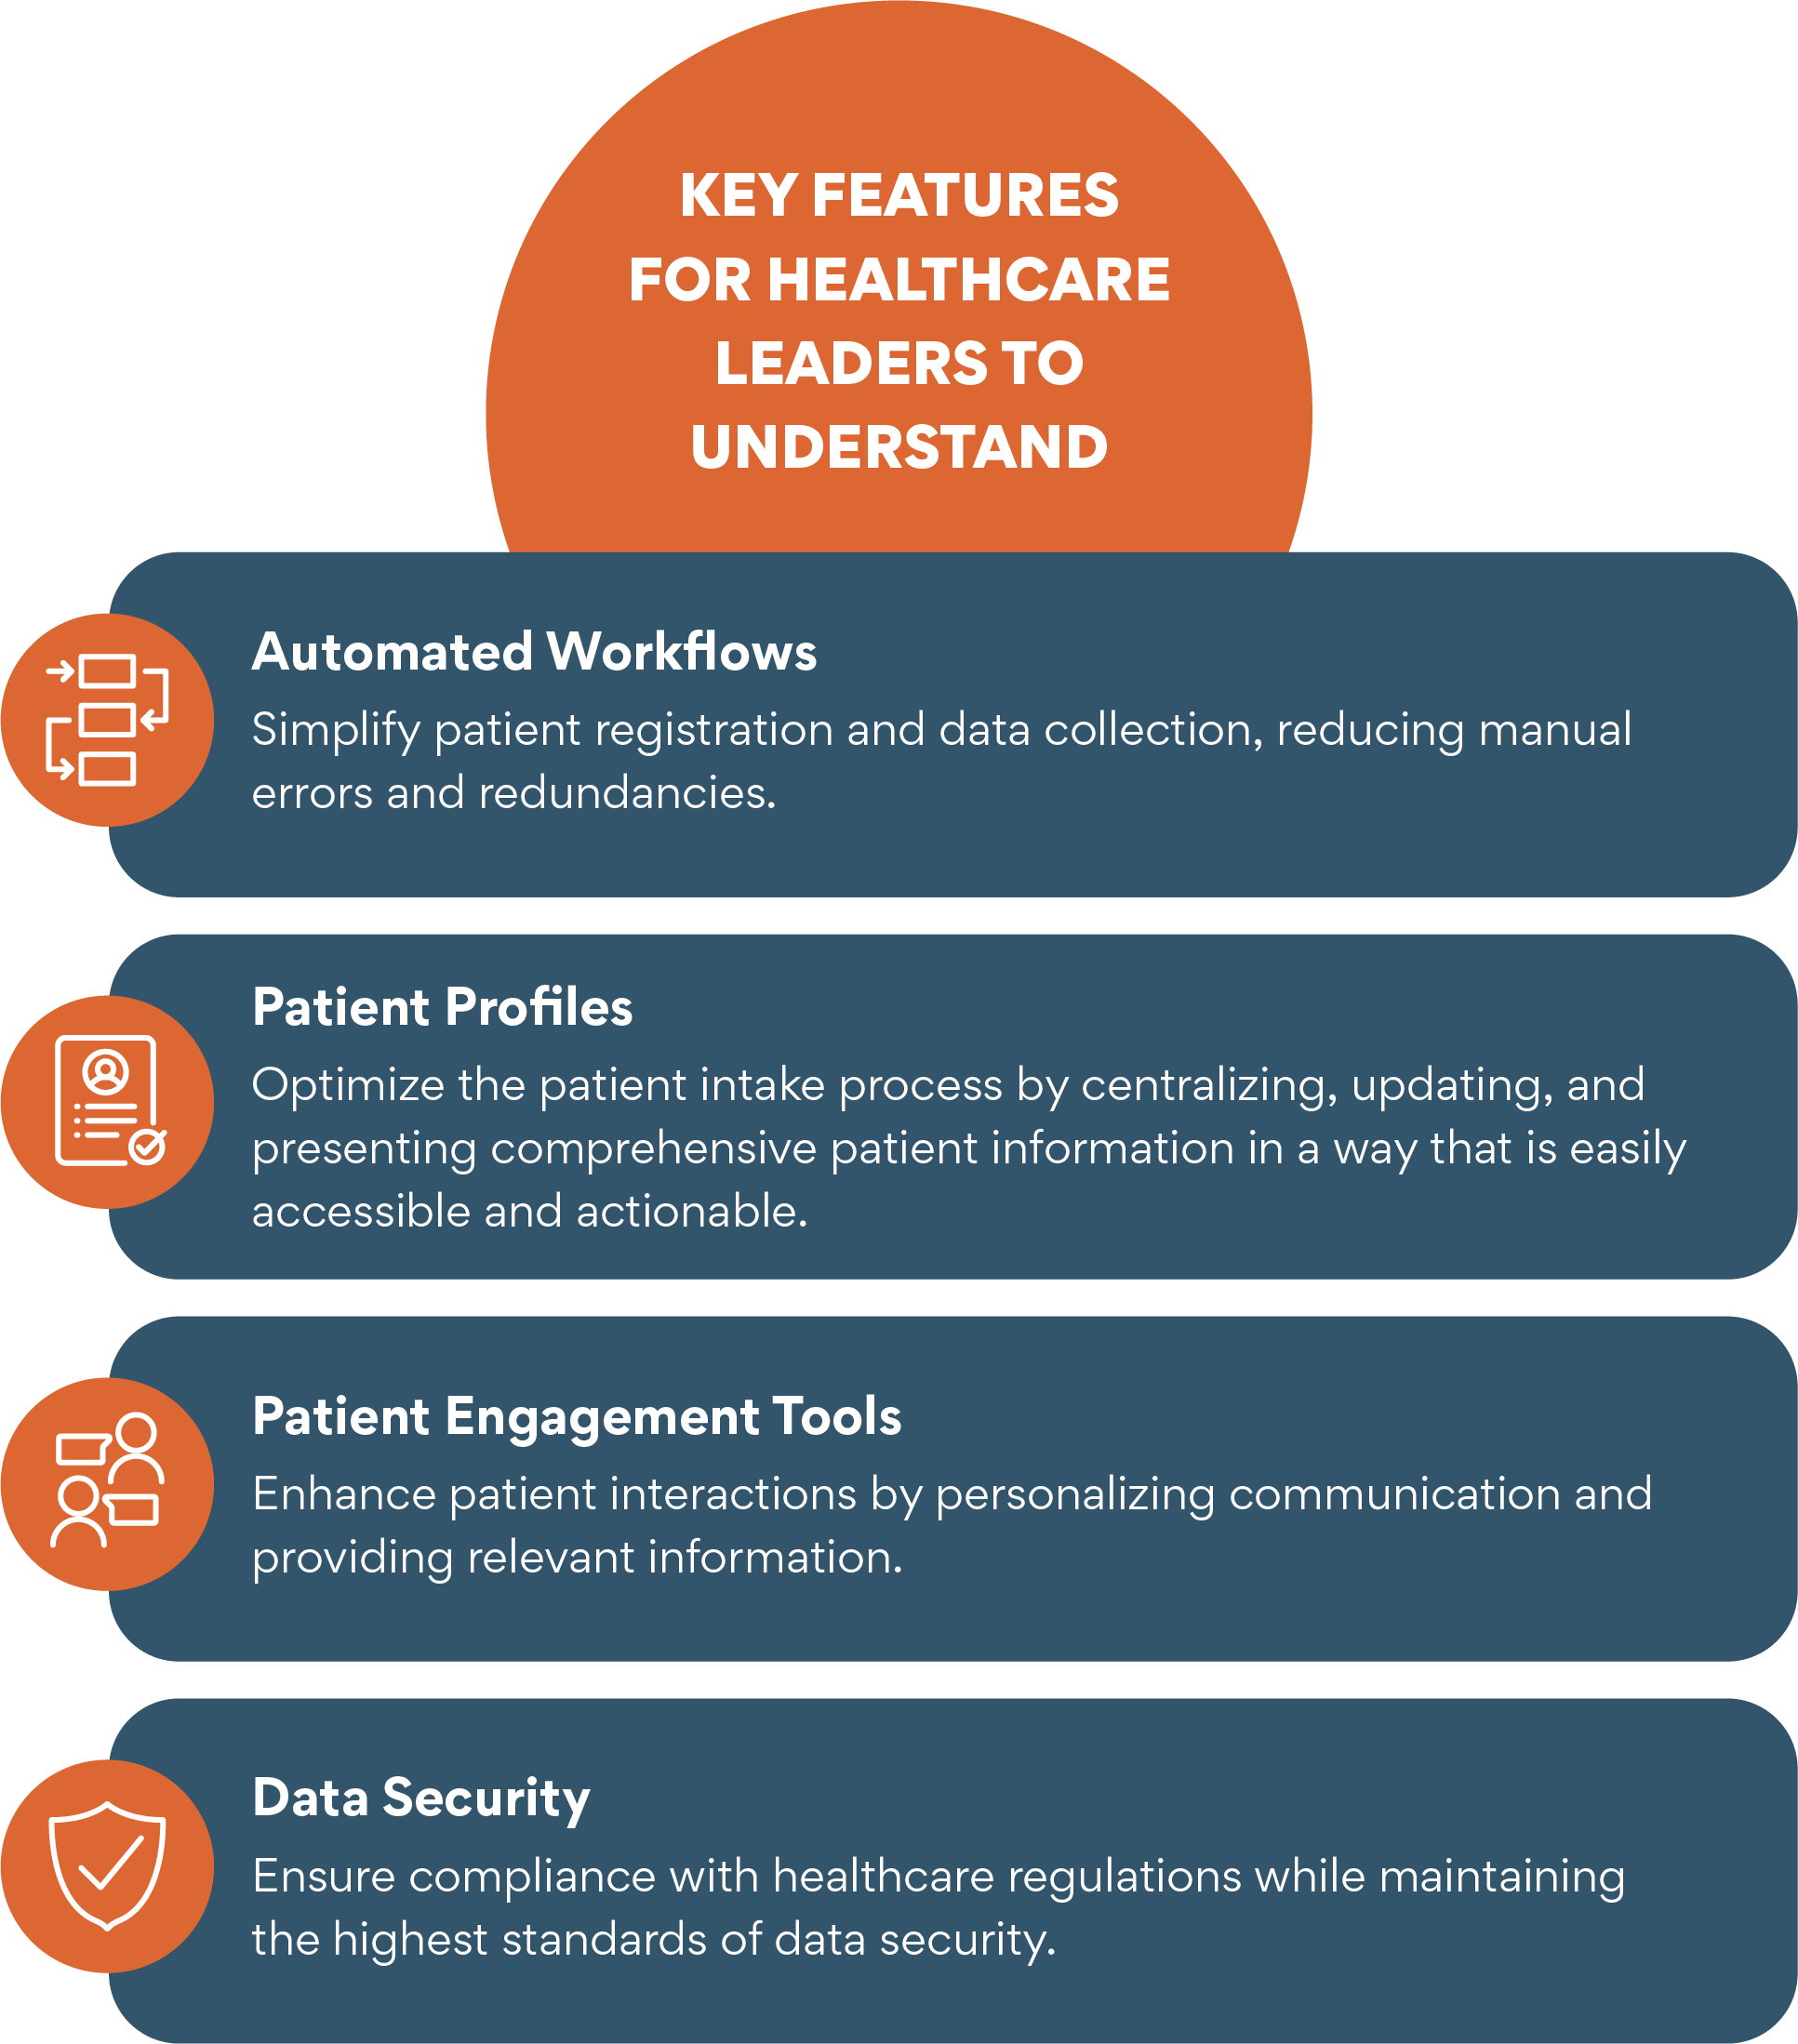 salesforce health cloud patient intake key features that all leaders need to understand